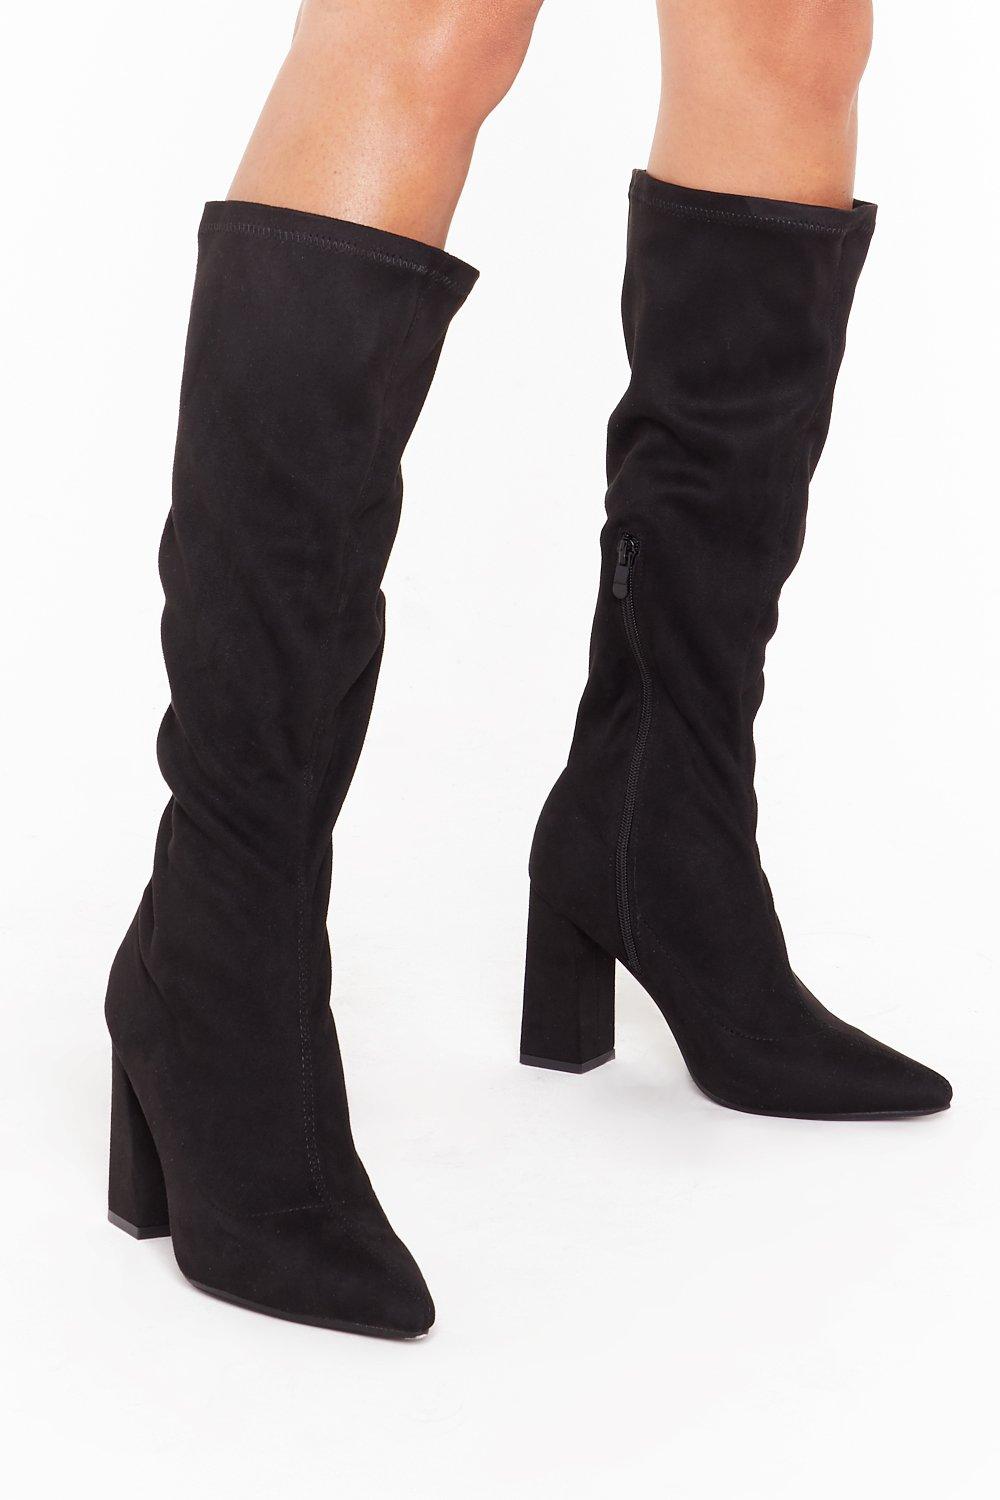 black suede high boots